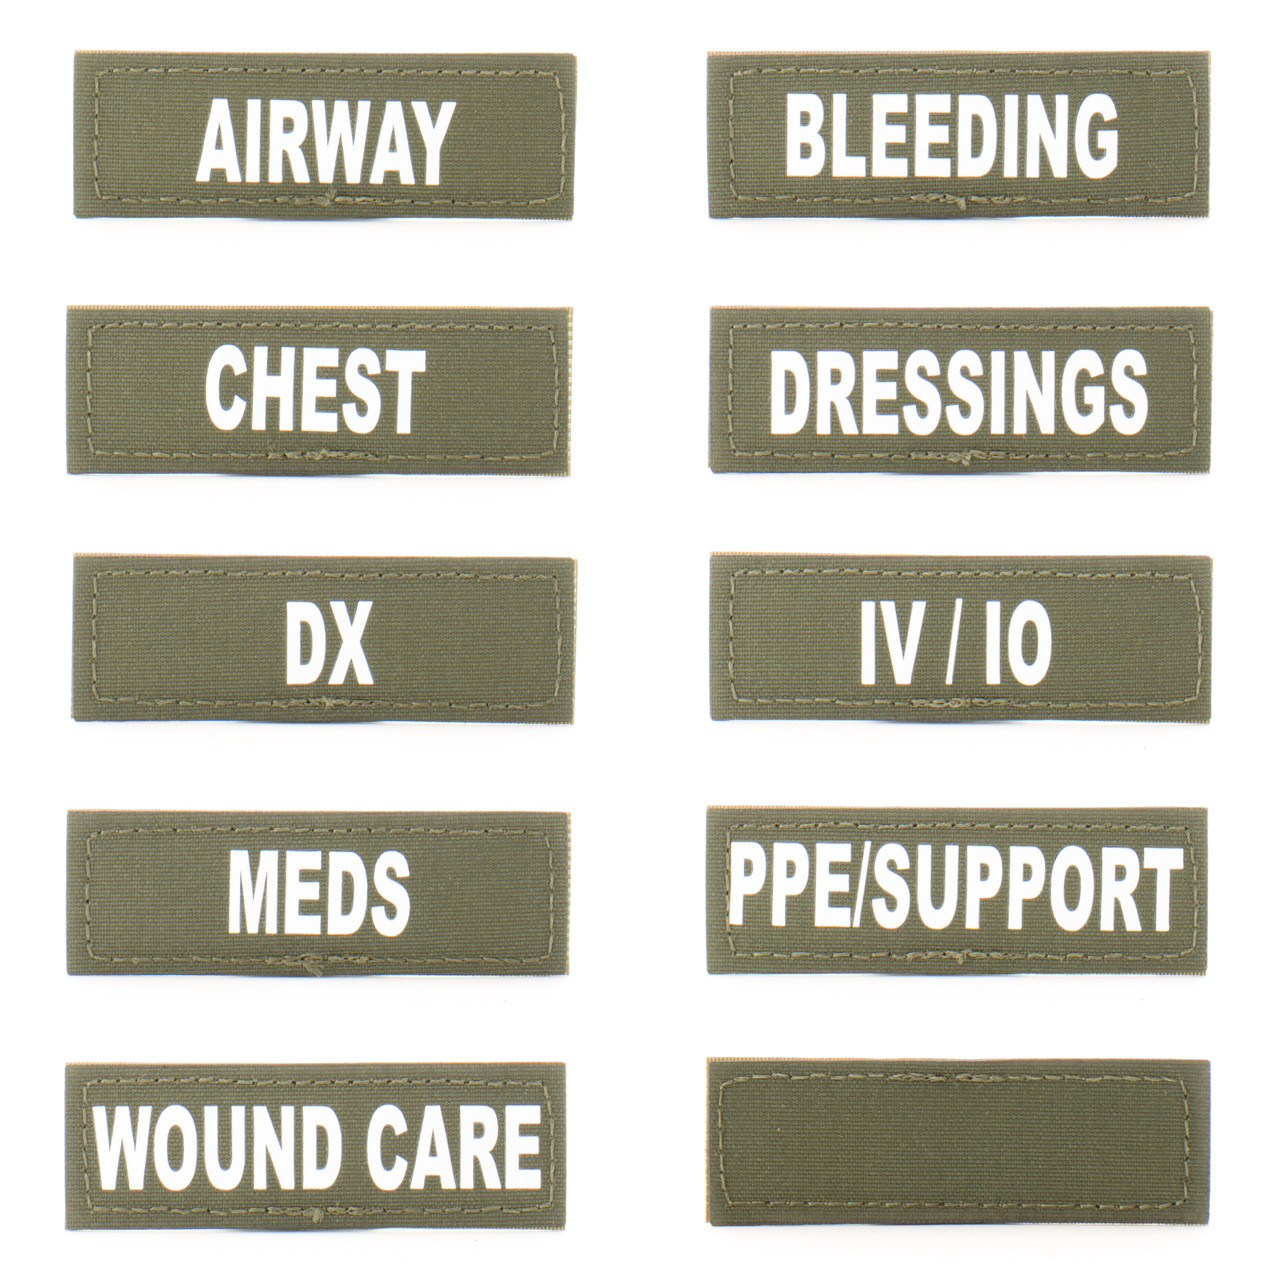 Eleven 10 Gear - Medical ID Patch